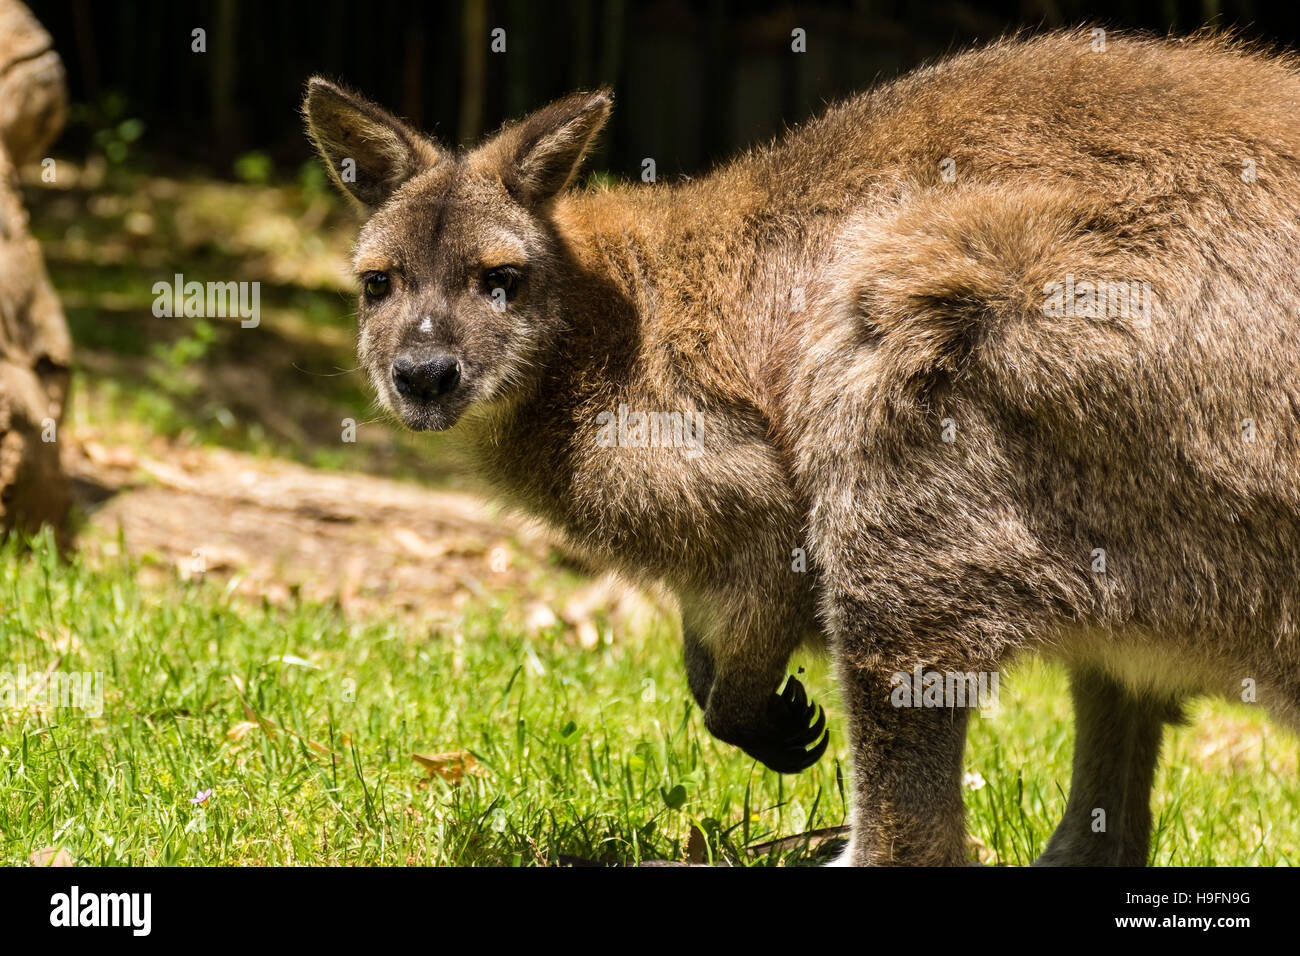 Red-necked wallaby (Macropus rufogriseus) staring Stock Photo